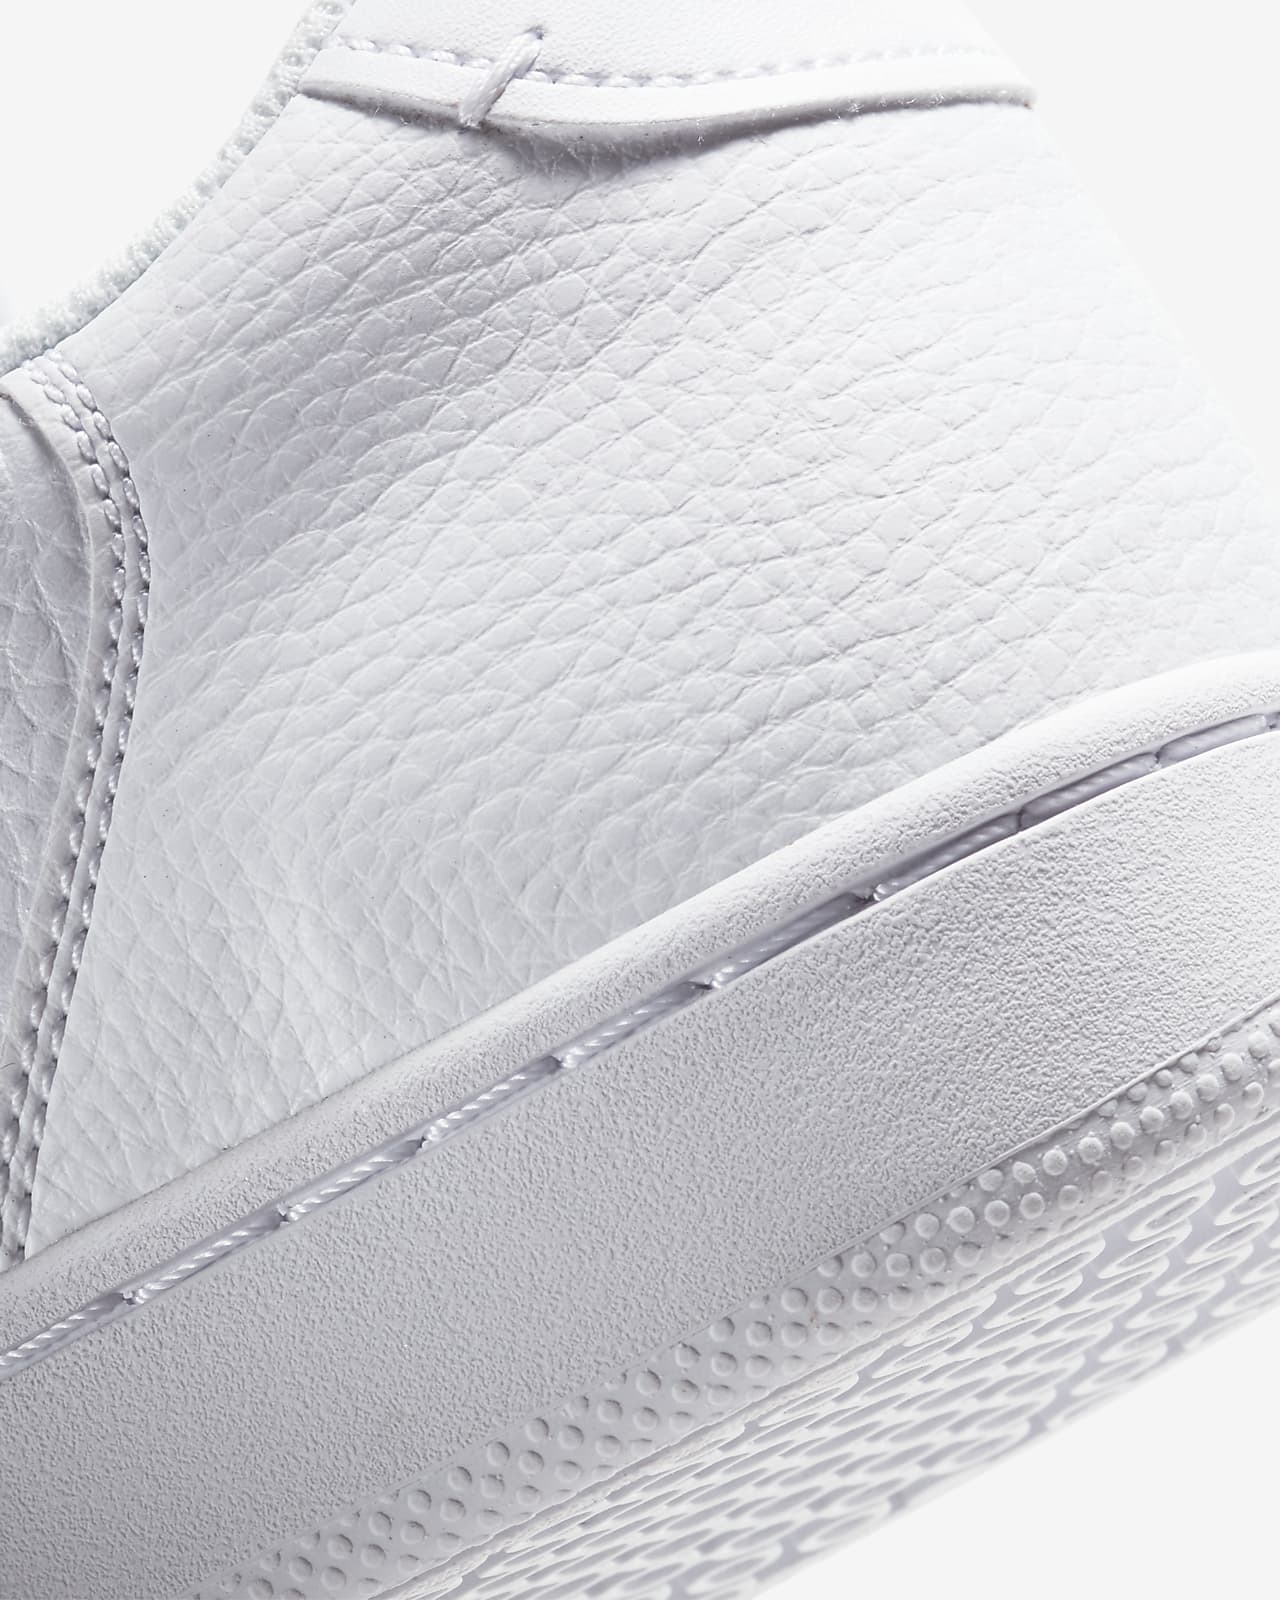 nike court vintage premium leather sneakers in white